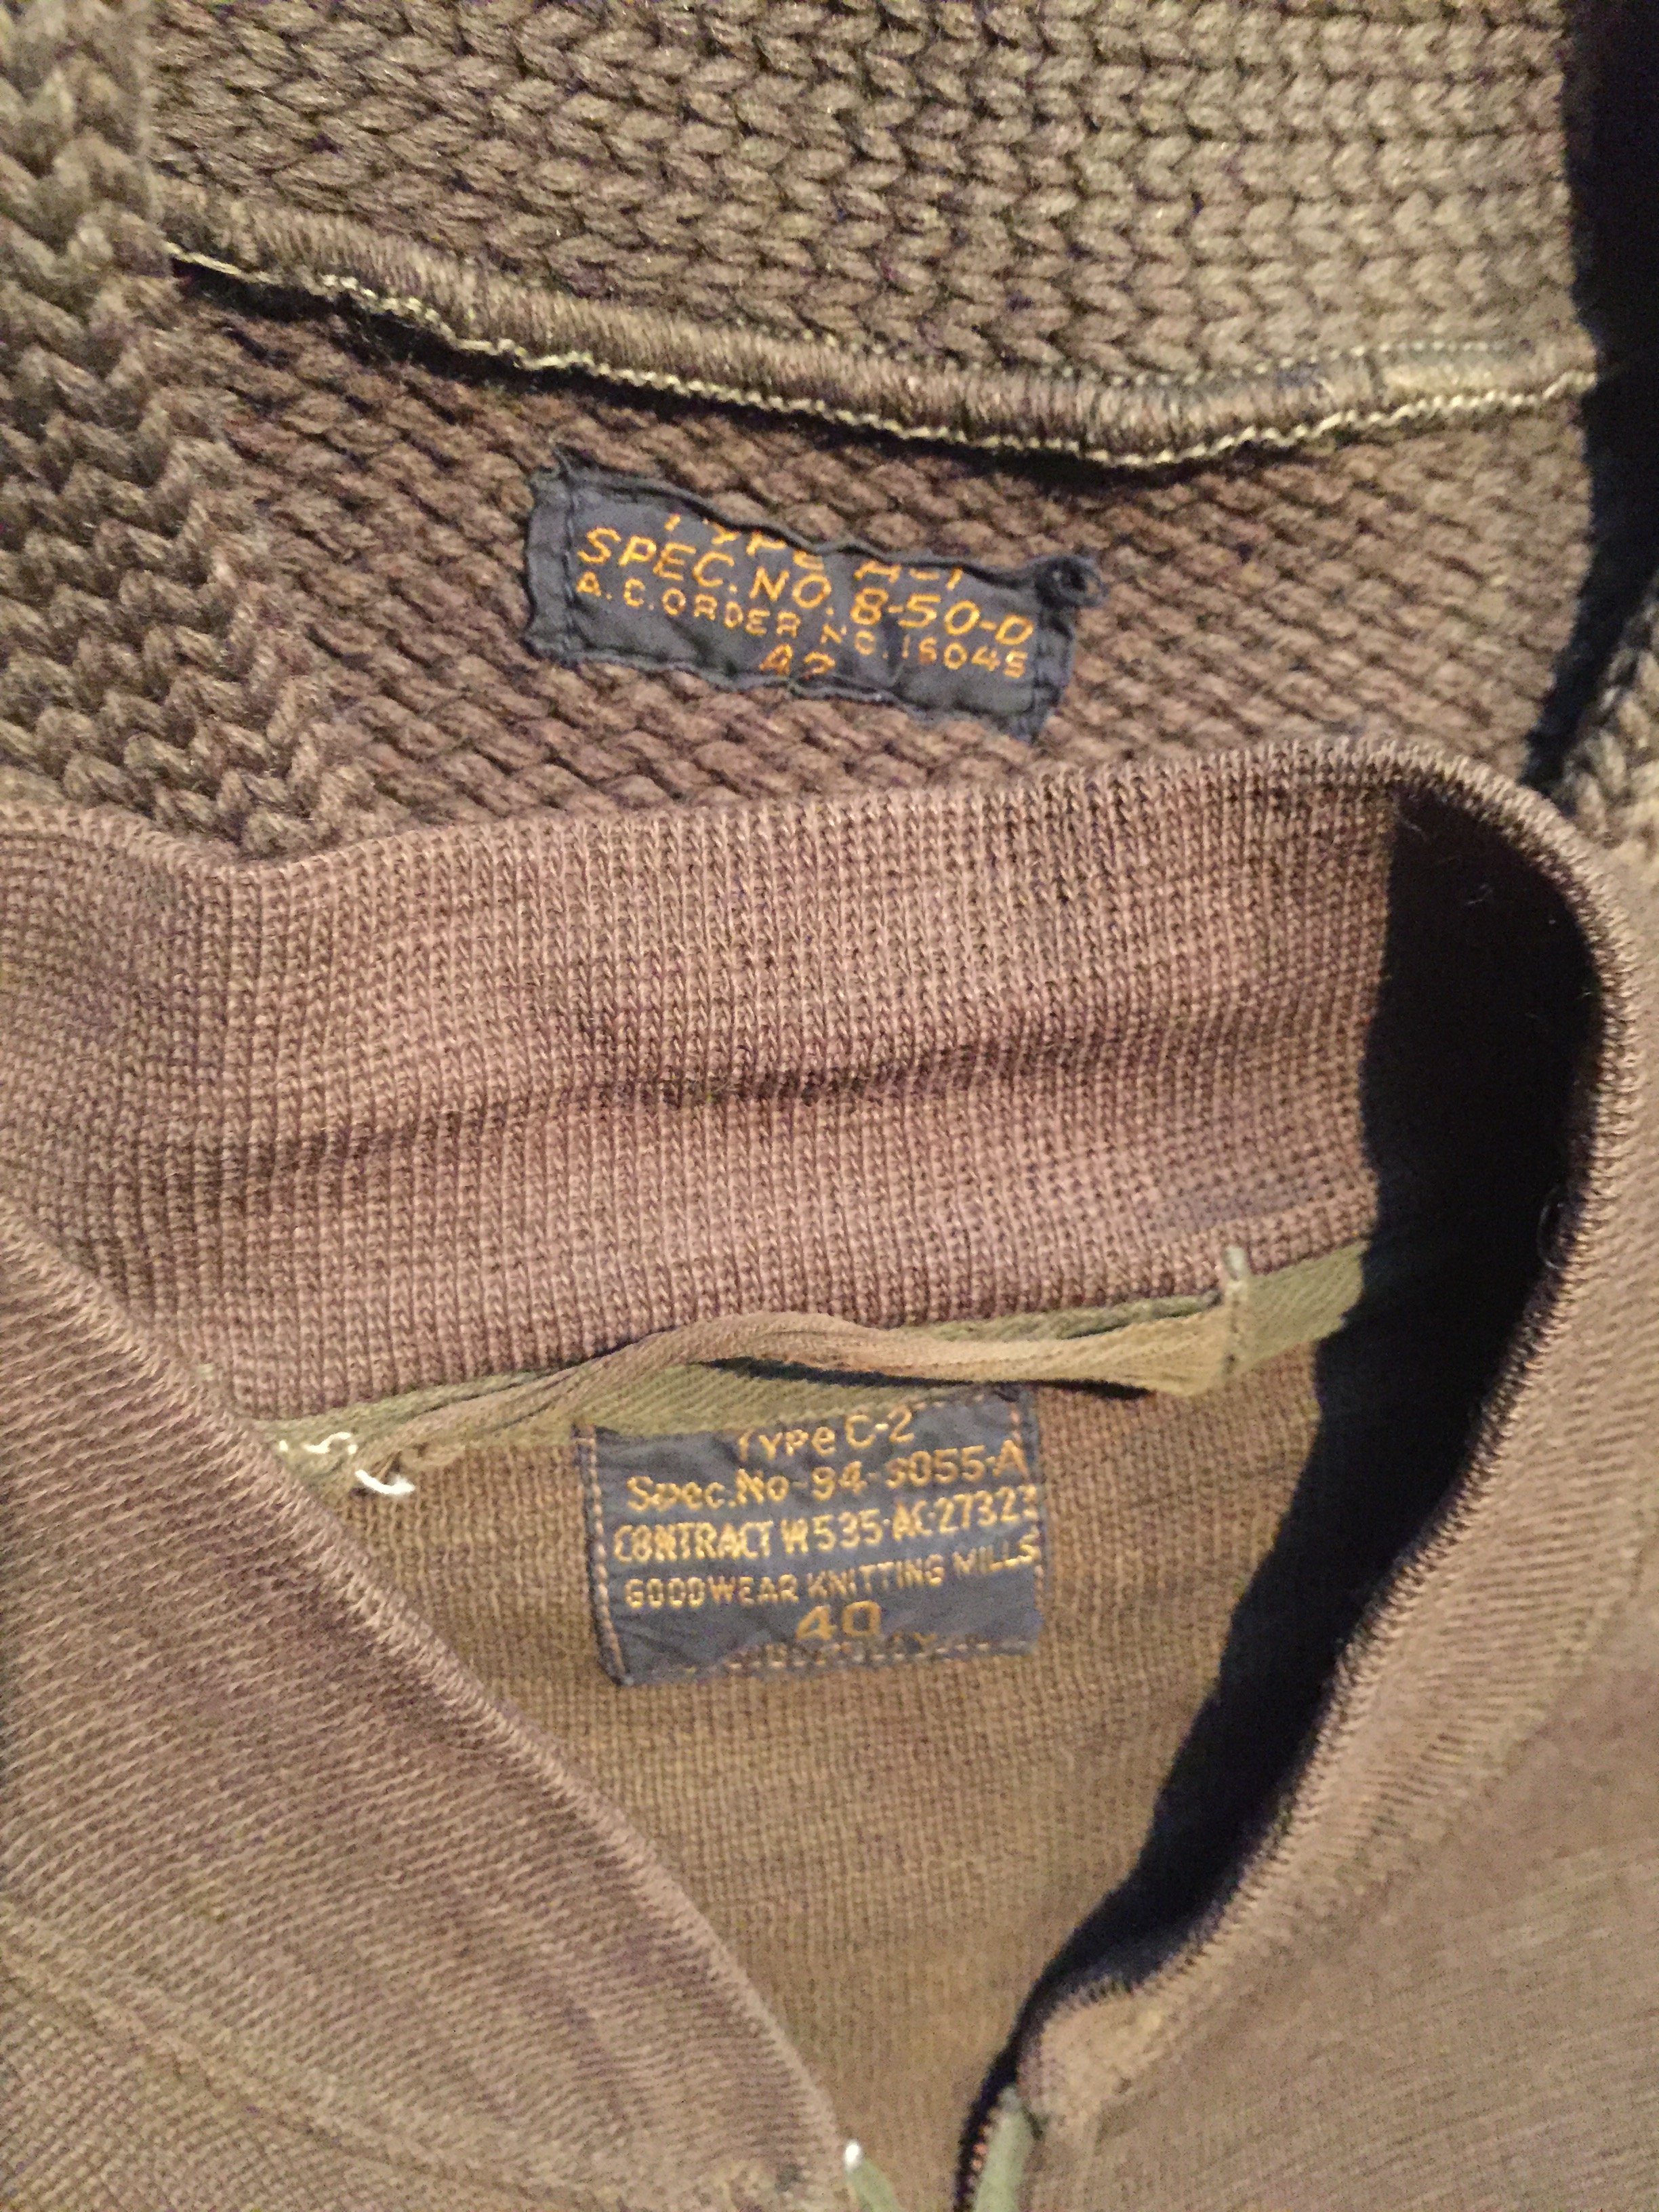 WWII Flying Sweaters | Vintage Leather Jackets Forum